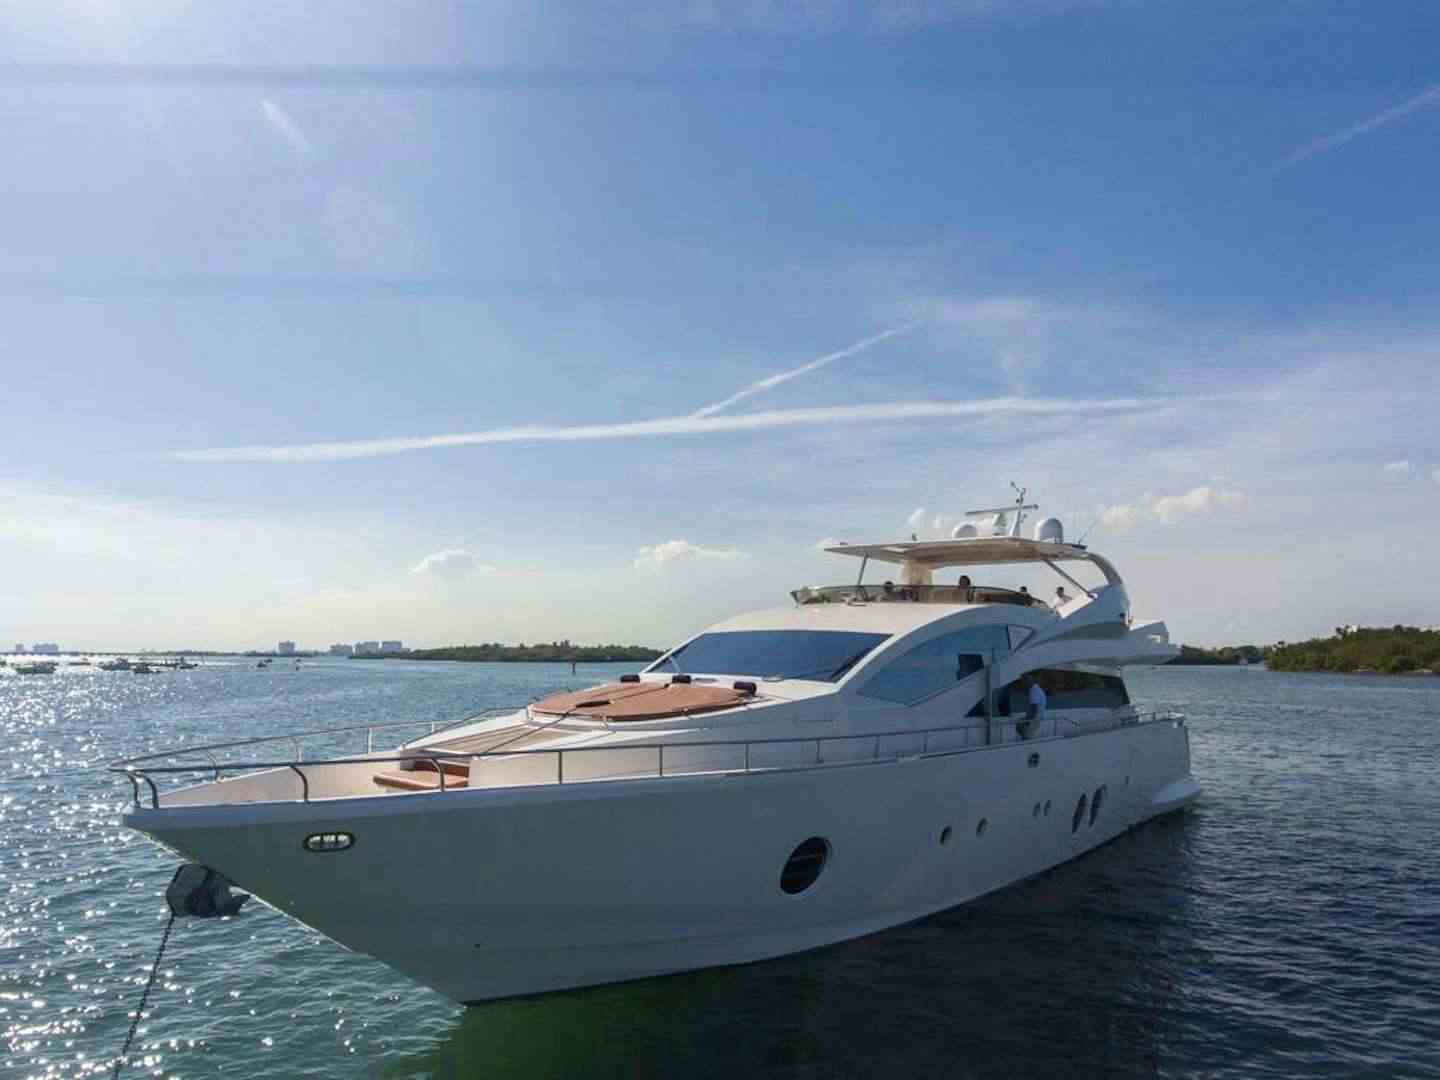 blu ocean - Yacht Charter Annapolis & Boat hire in US East Coast, Bahamas & Mexico 1